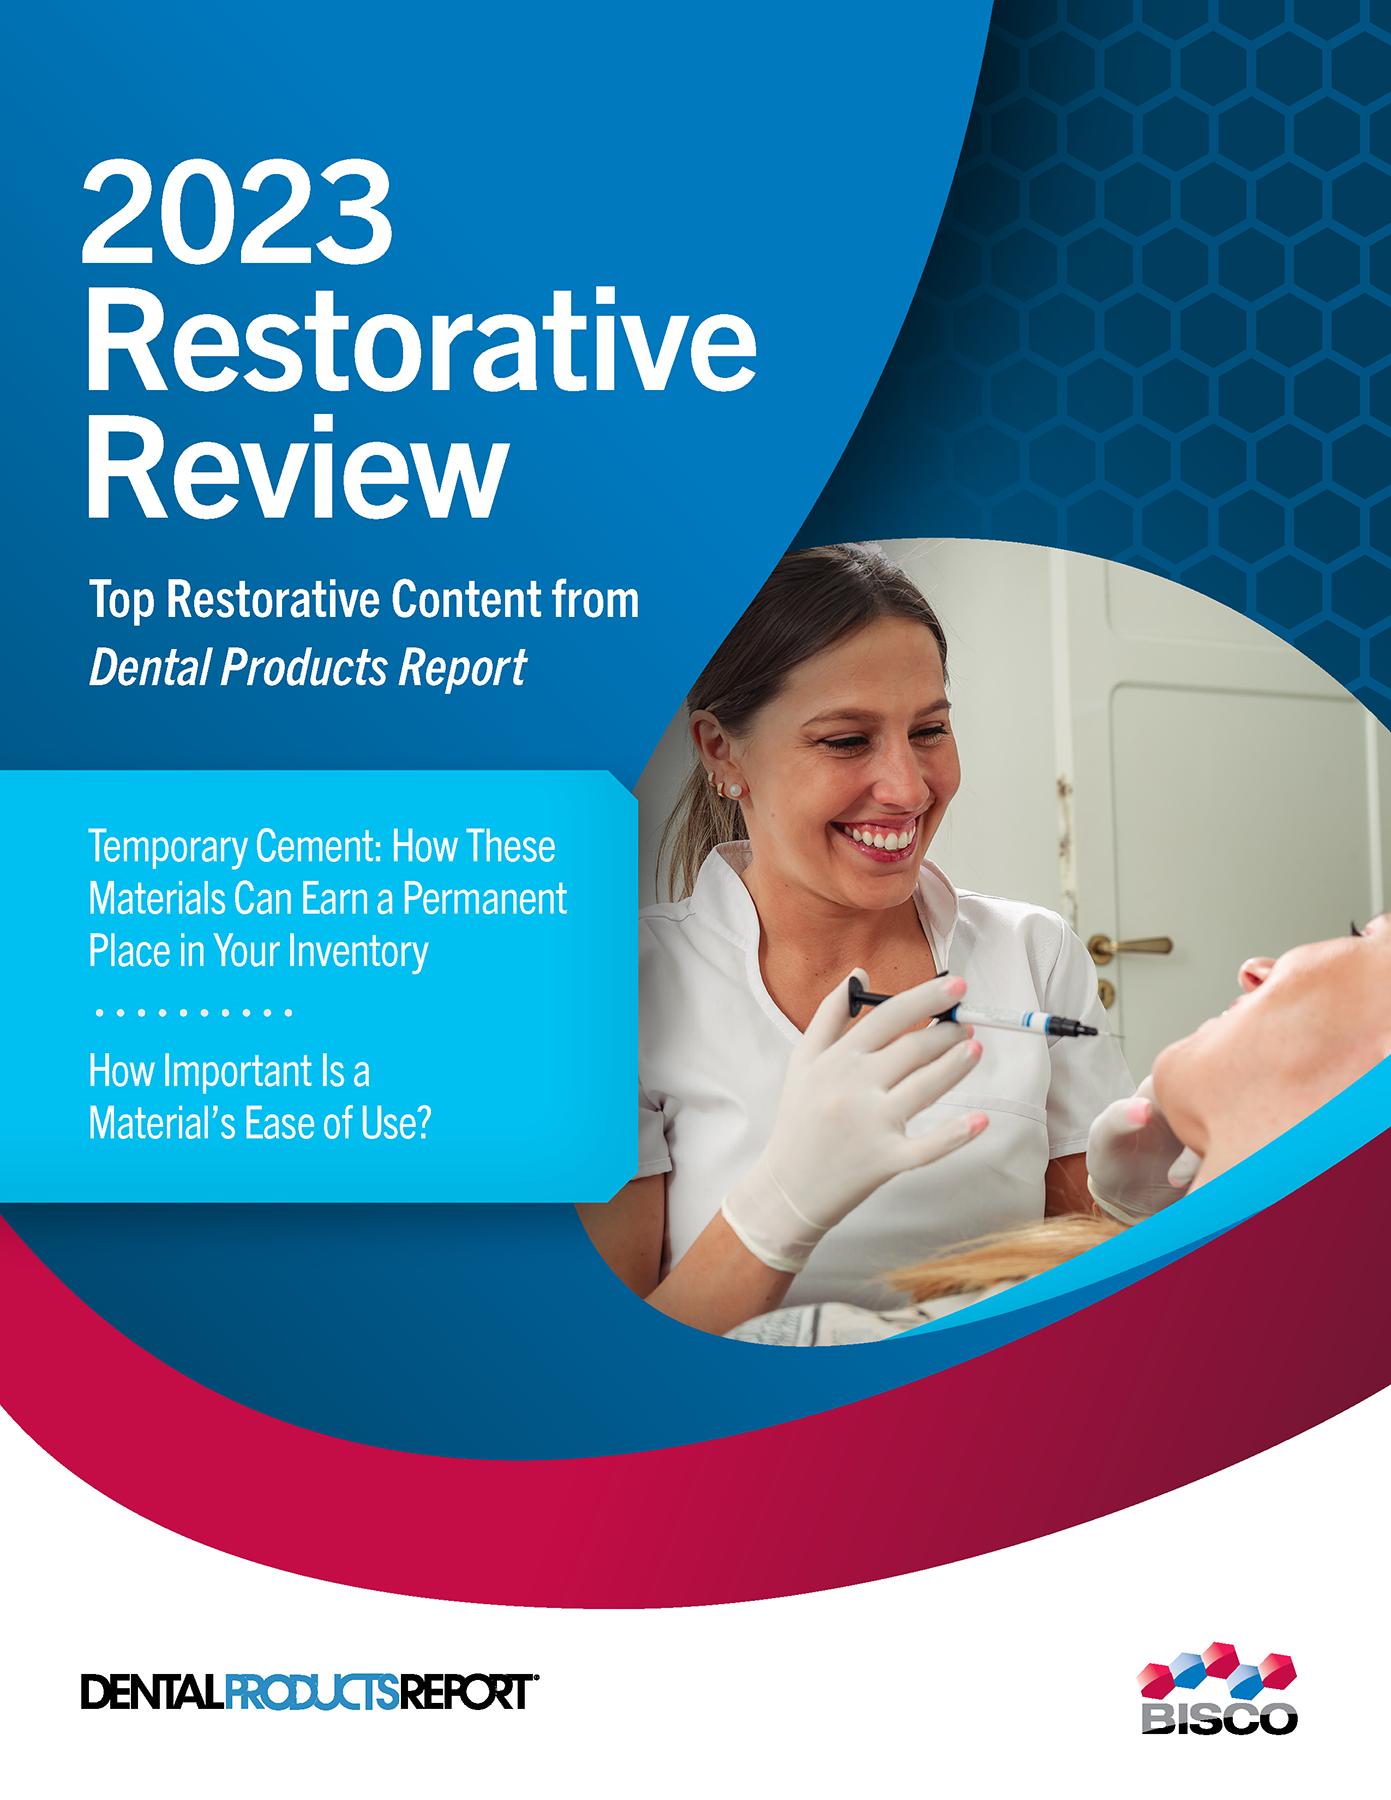 2023 Restorative Review Top Restorative Content from Dental Products Report